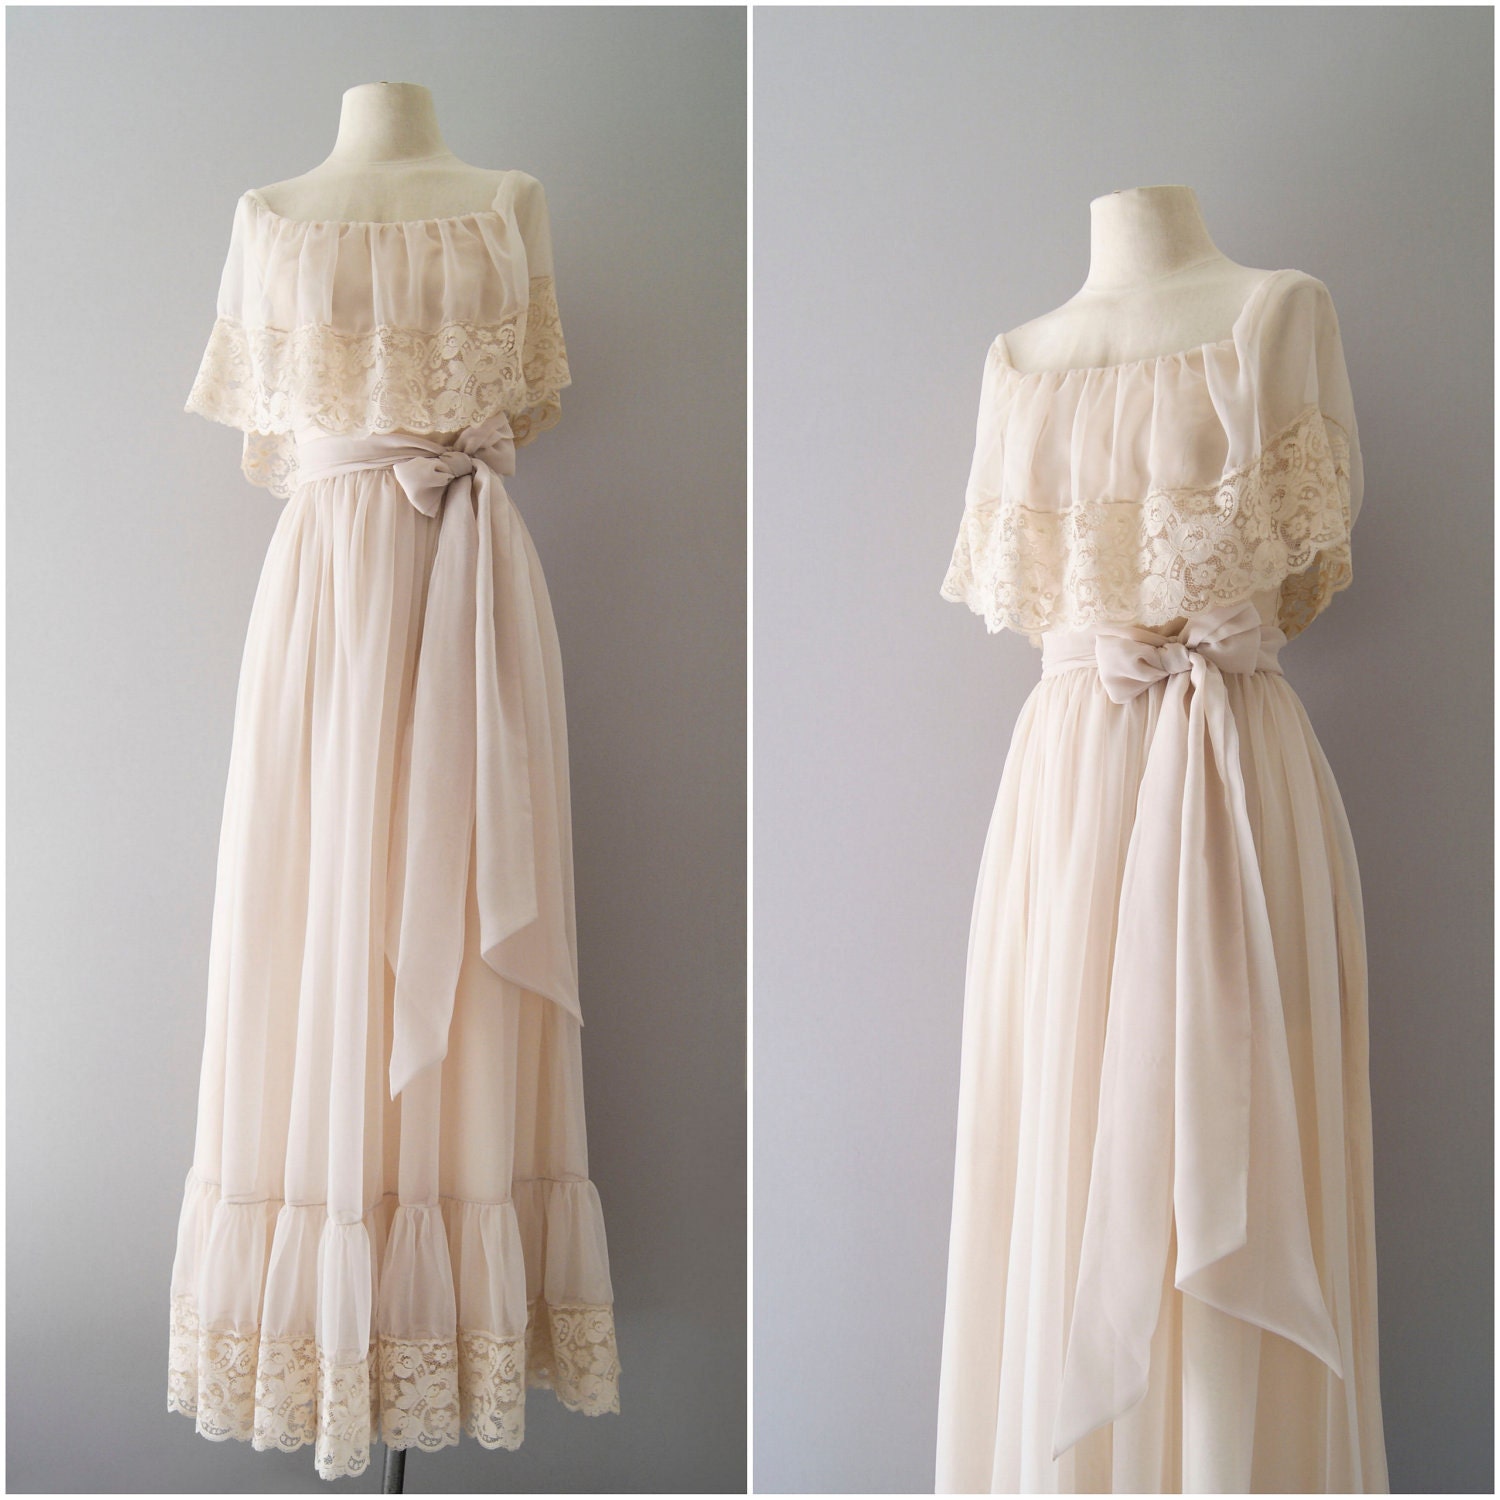 70s wedding dress / 1970s Victor Costa bridal by VacationVintage